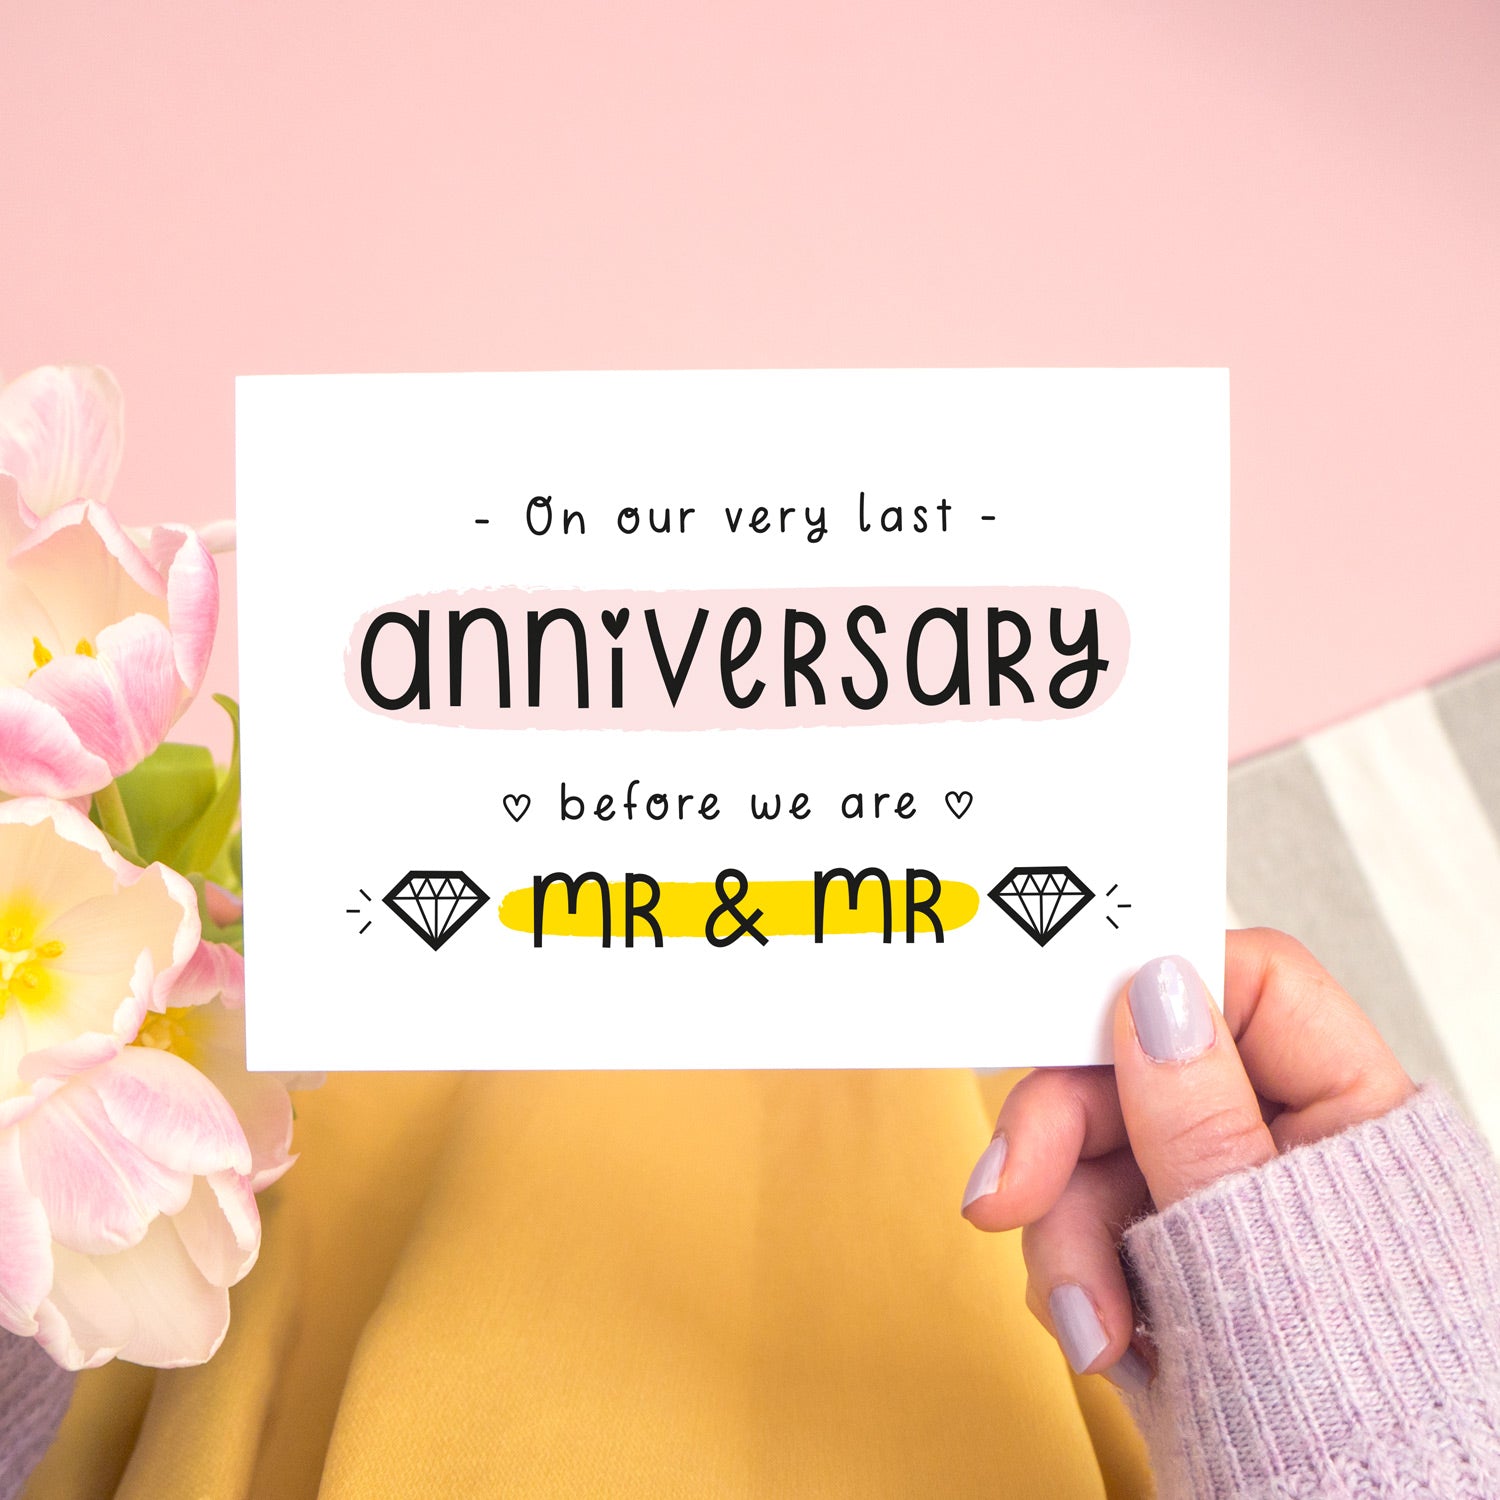 A last anniversary or Valentine’s card photographed on a pink background with pink tulip flowers, a grey and white stripe rug and yellow fabric. This image shows the last anniversary option with the Mr & Mr wording. The text is black and there are pops of yellow and pink behind key words.